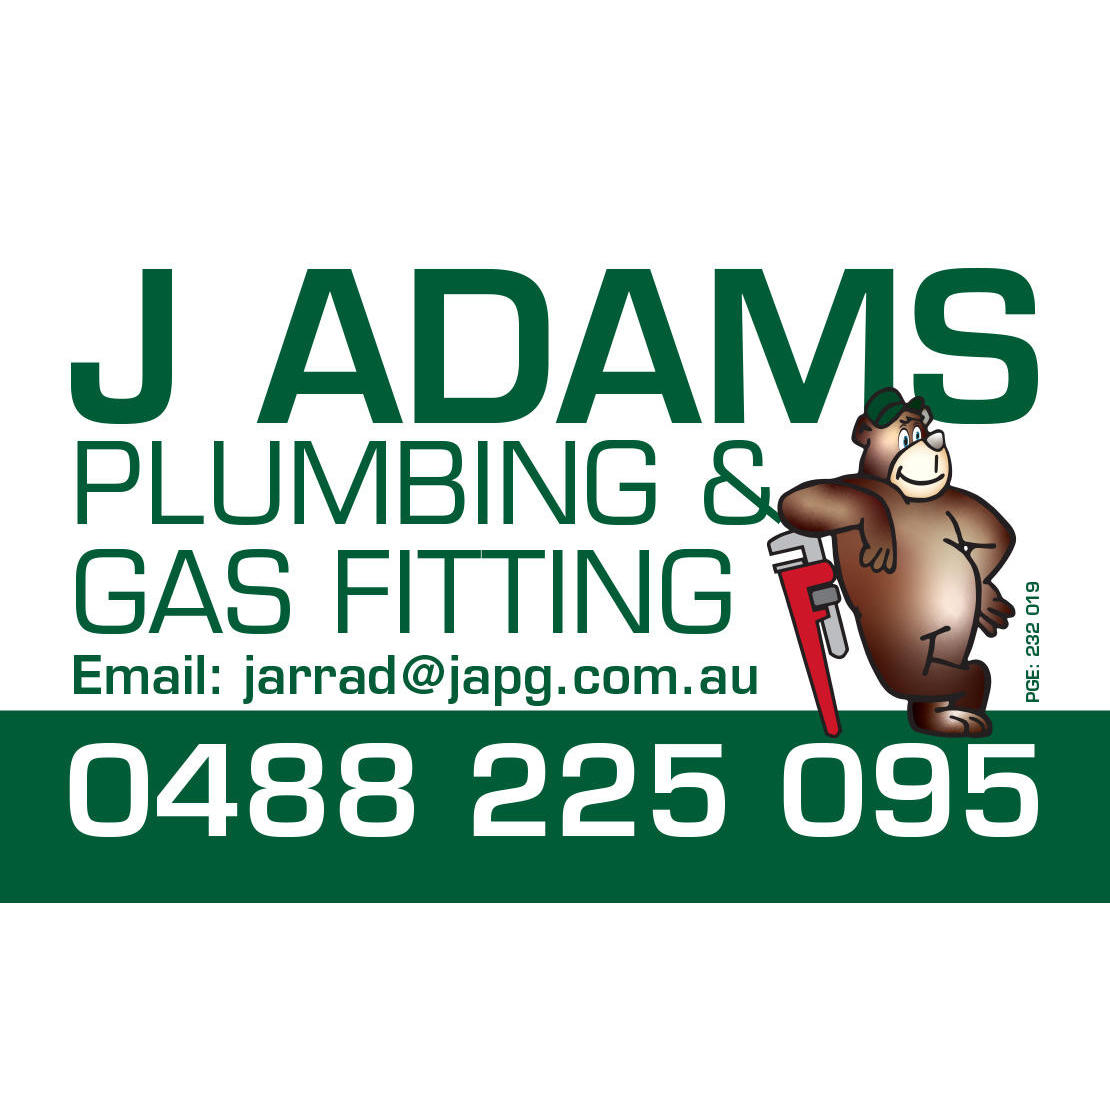 J Adams Plumbing and Gas Fitting Port Pirie West 0488 225 095